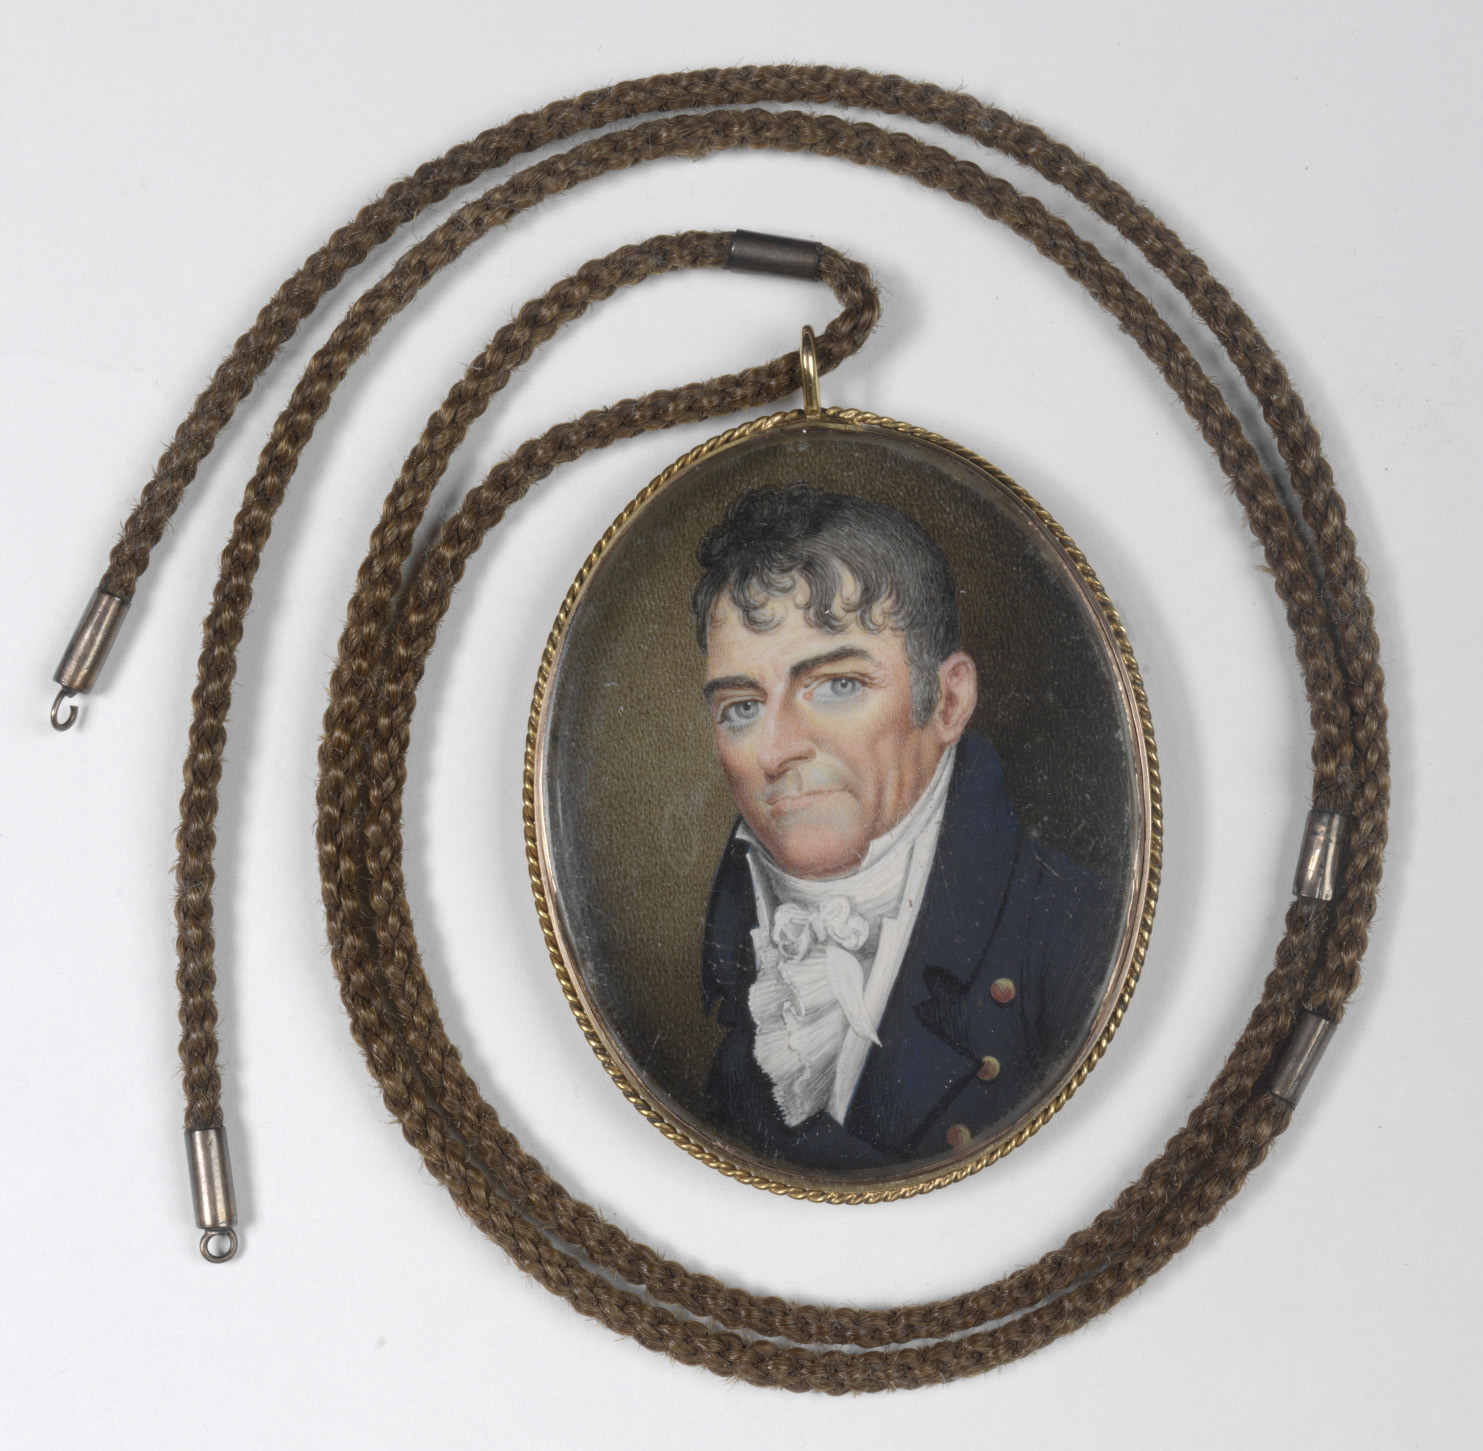 Miniature portrait of Captain Eber Bunker, about 1810. Bucker captained some of Australia’s earliest whaling ships. 